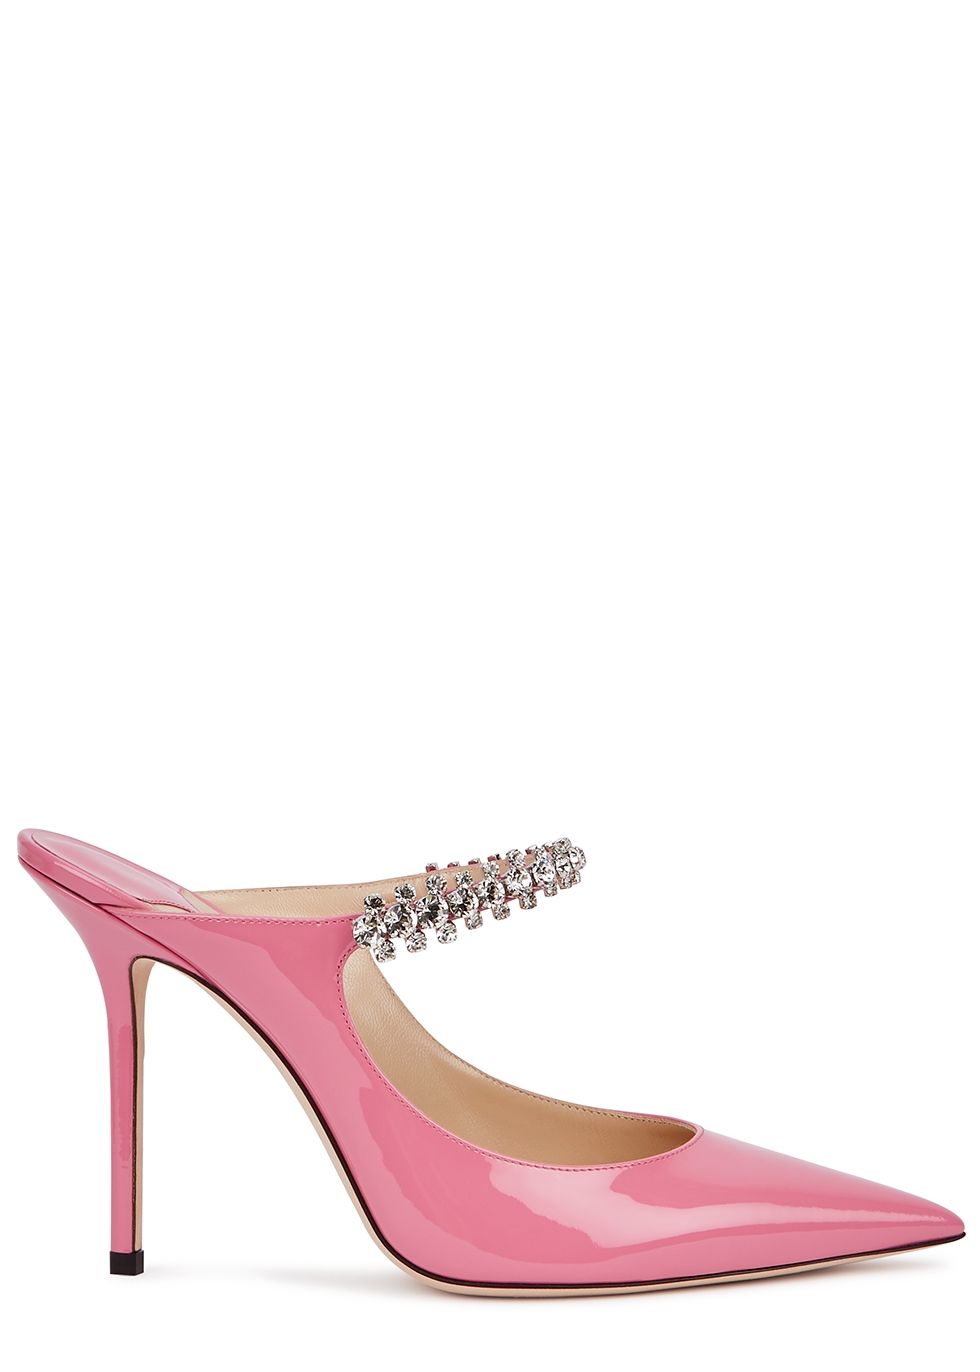 Jimmy Choo Bing 100 pink embellished patent leather mules